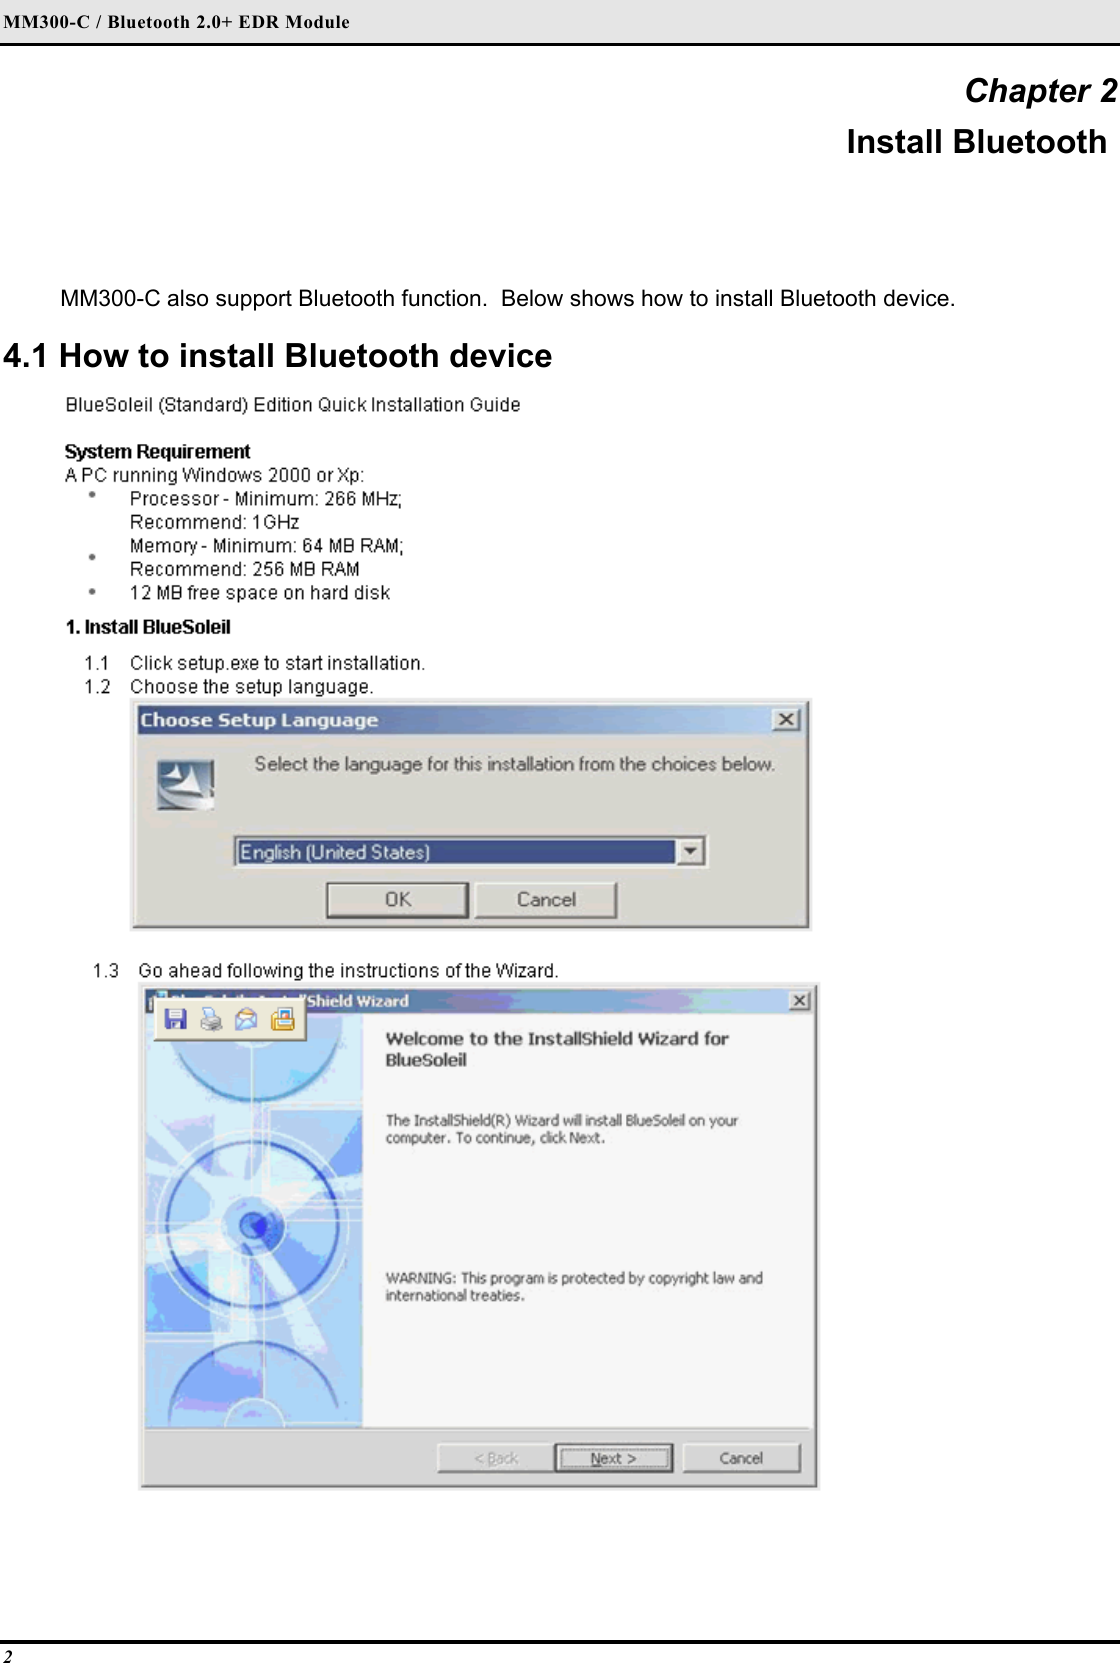 MM300-C / Bluetooth 2.0+ EDR Module 2 Chapter 2 Install Bluetooth  MM300-C also support Bluetooth function.  Below shows how to install Bluetooth device.  4.1 How to install Bluetooth device    